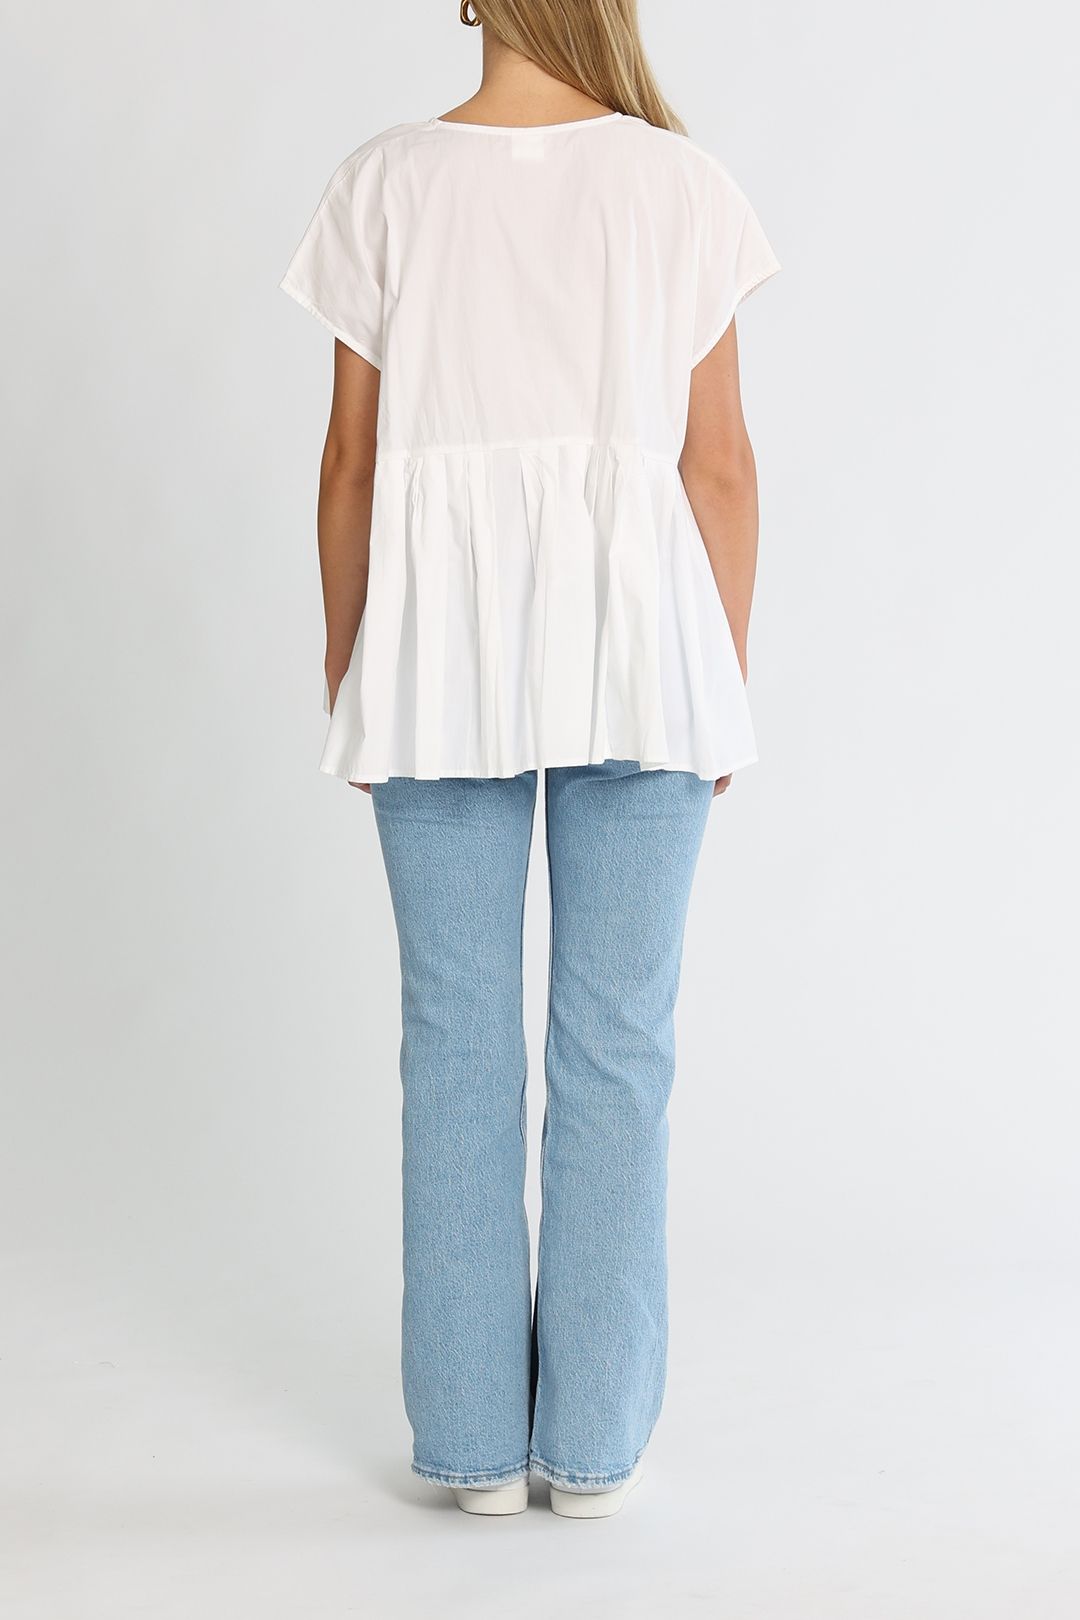 Kowtow Form Short Sleeve Top White Relaxed Fit